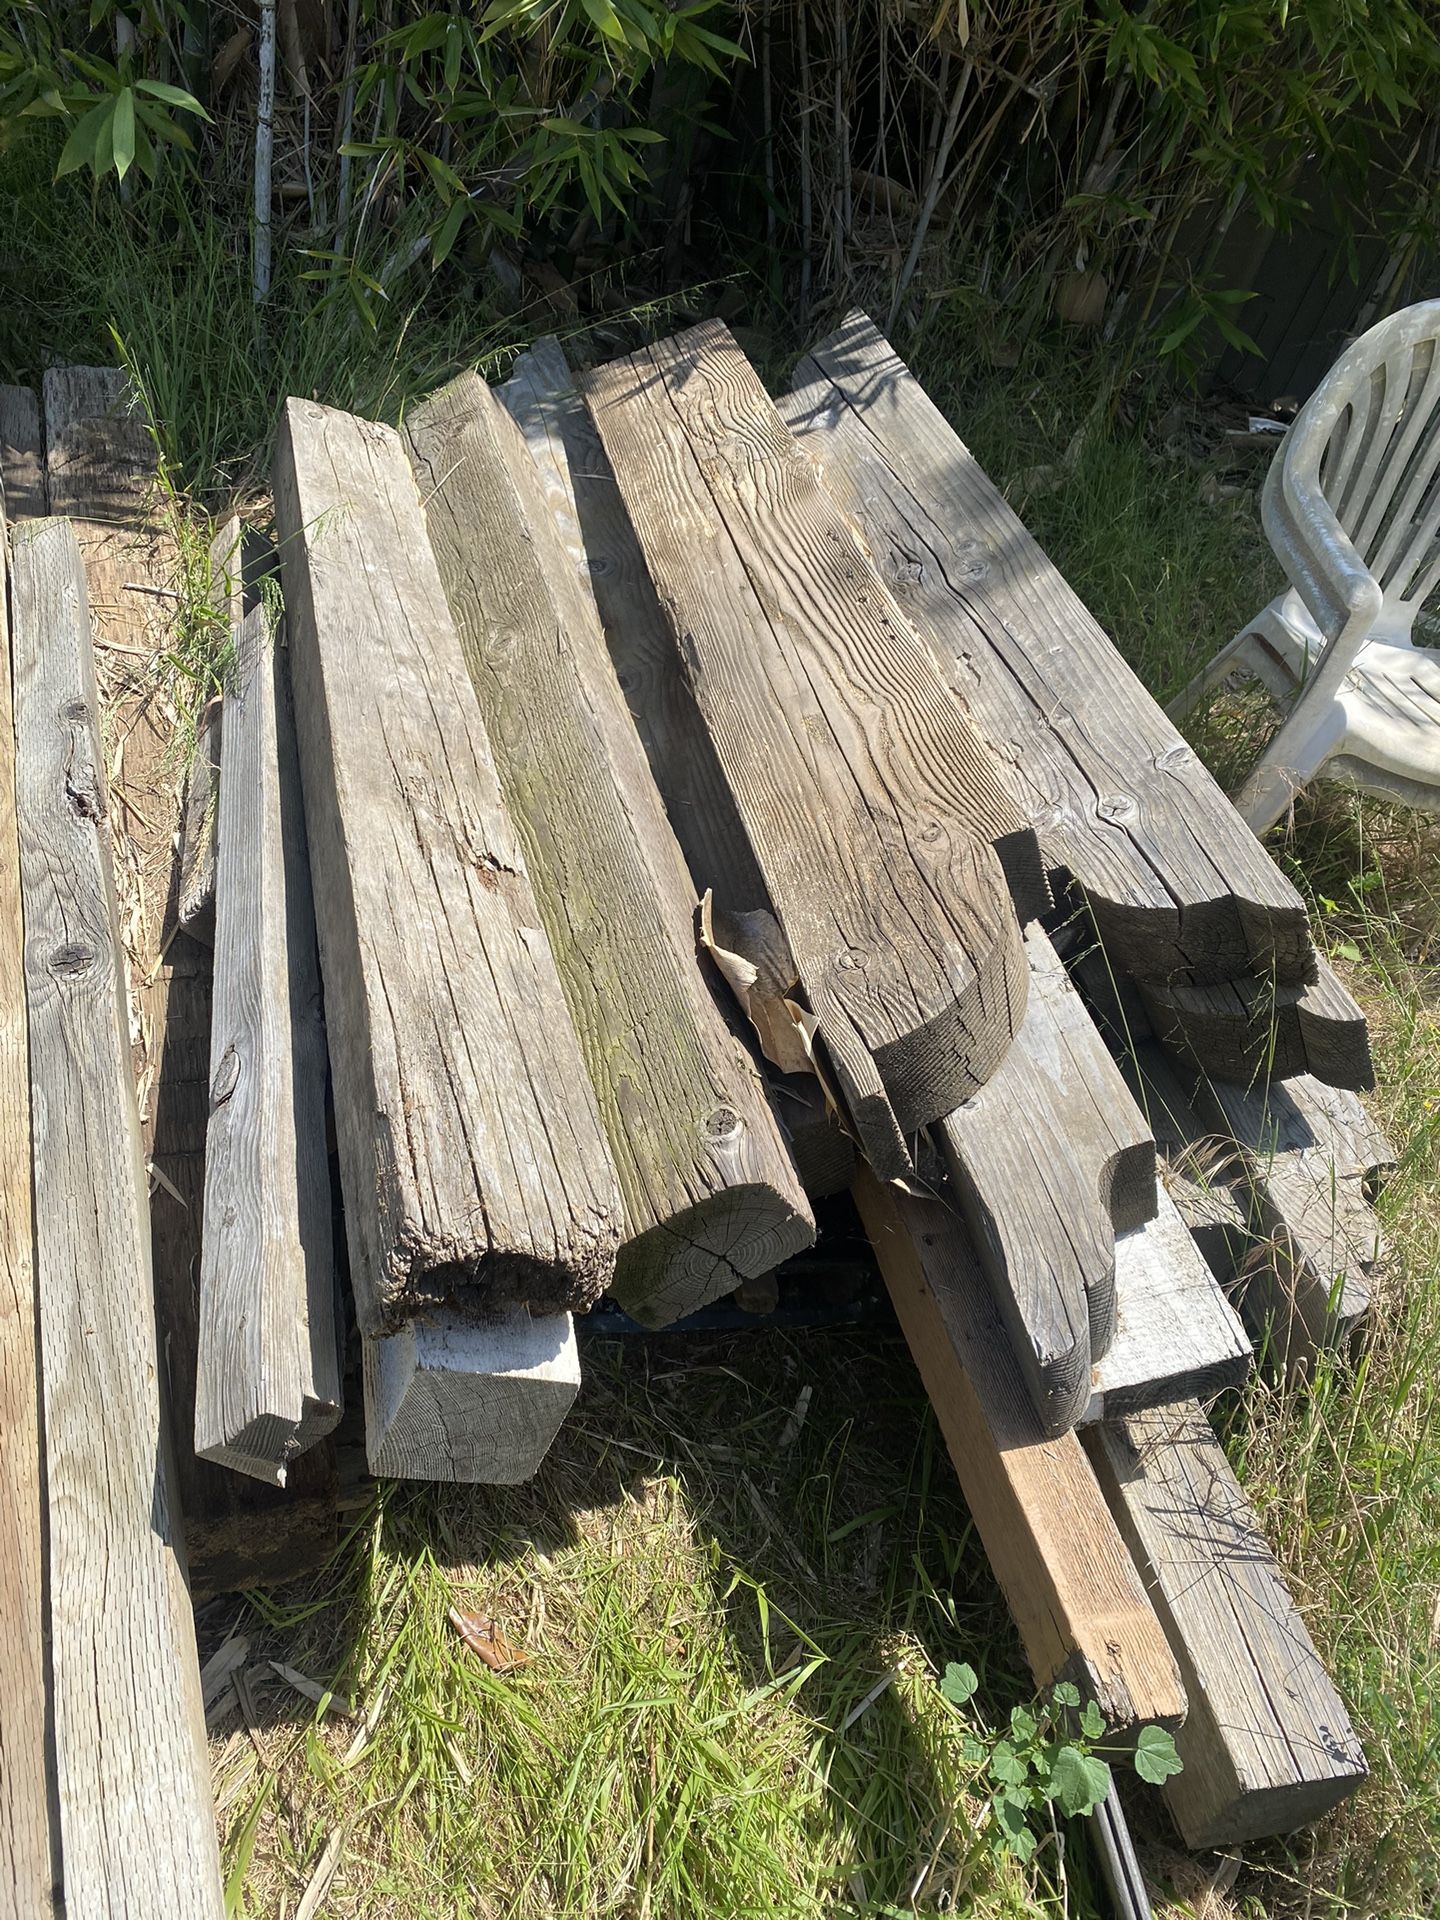 Reclaimed Lumber For Sale Large And Small Loads 